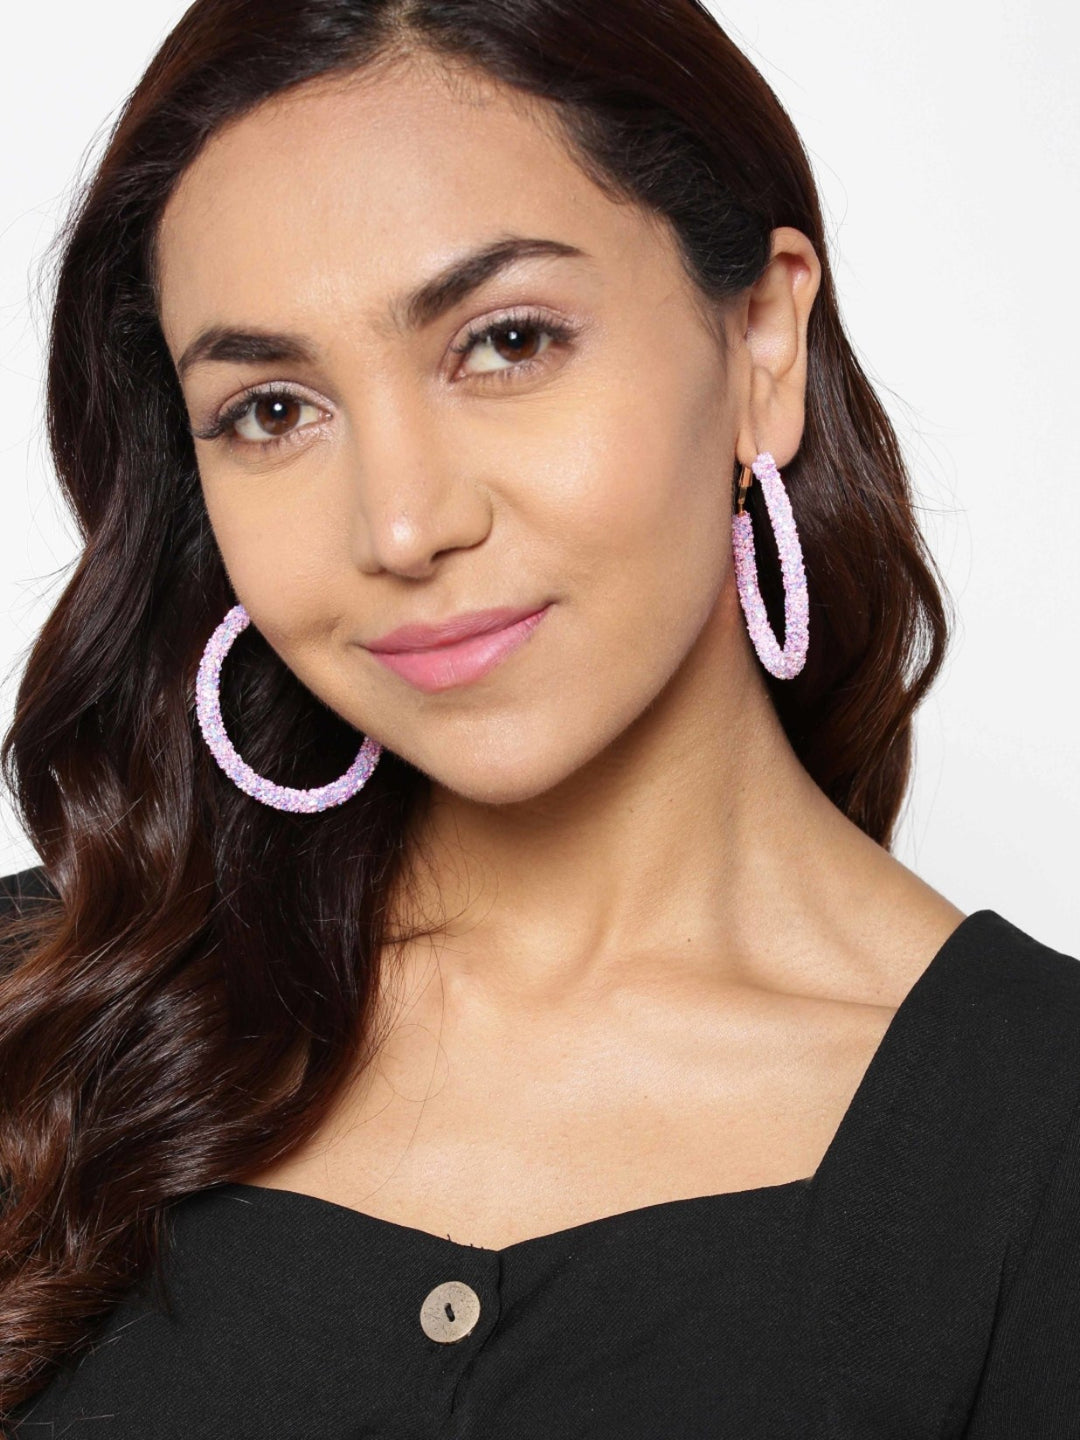 Designer Pink Sparkling Party Wear Stylish Trendy Fashionable Big Hoop Earrings For Women And Girls